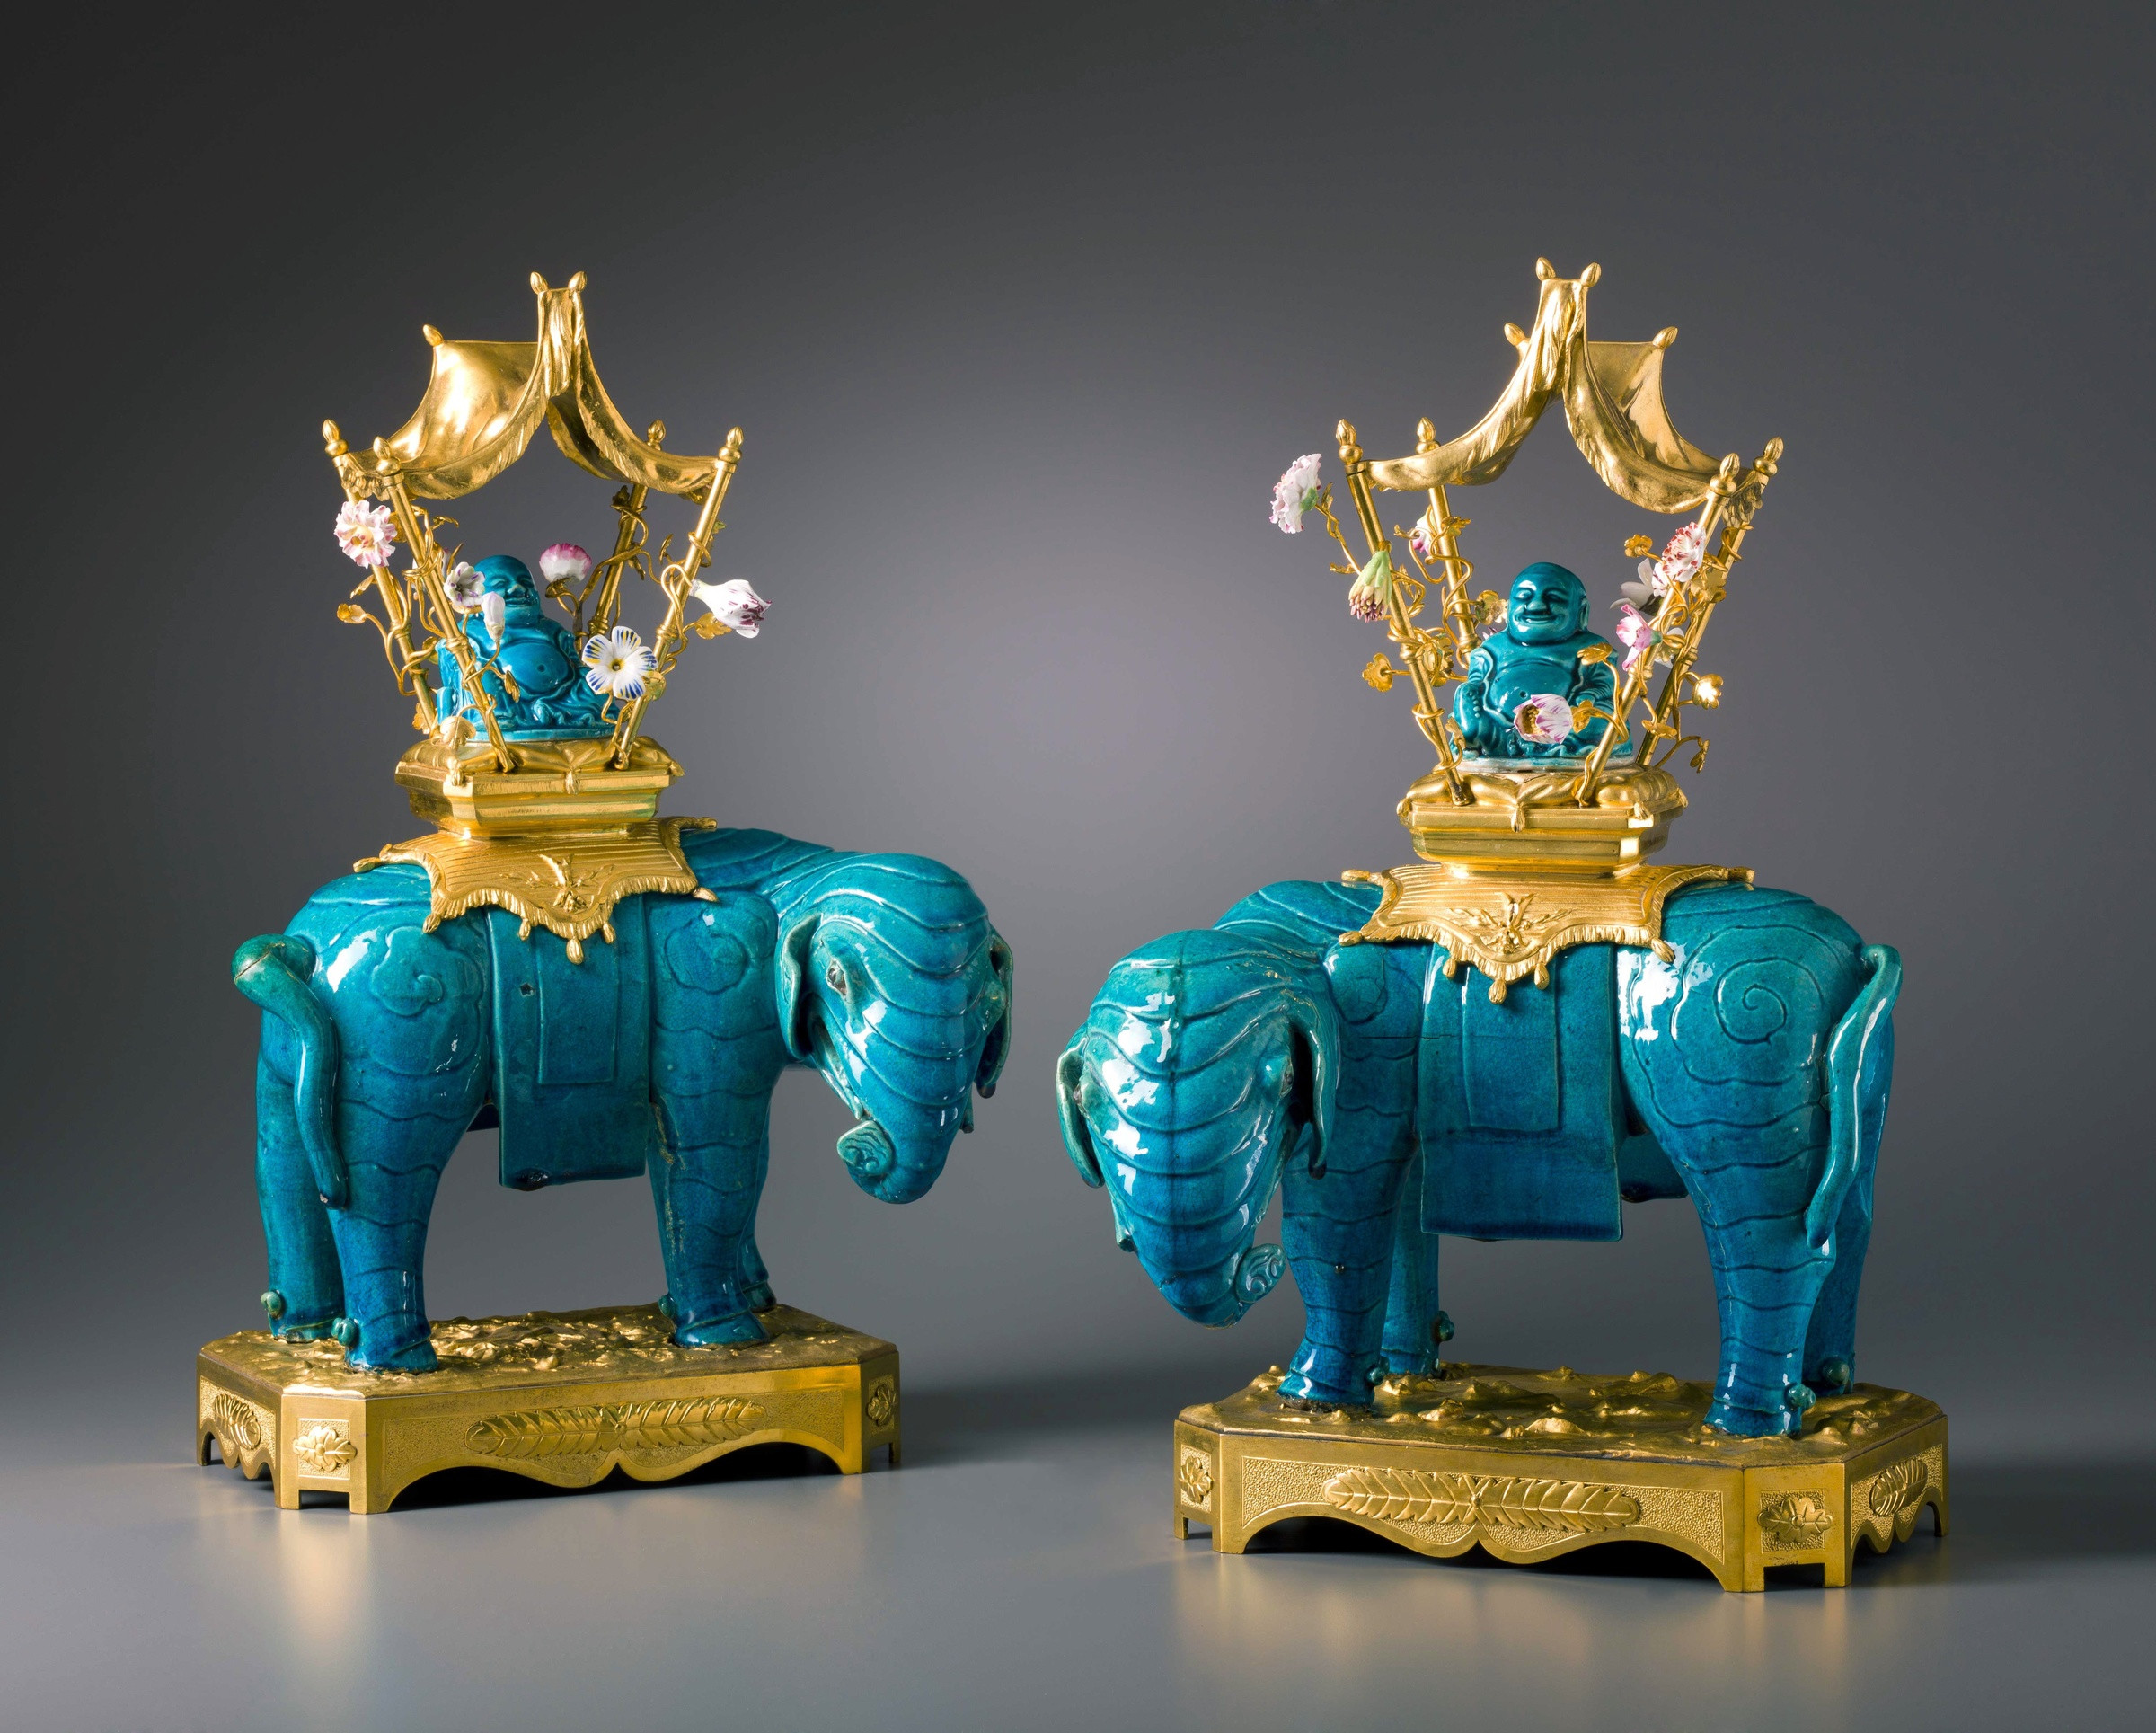 26 Awesome Ming Dynasty Vase for Sale 2024 free download ming dynasty vase for sale of unknown a pair of louis xv gilt bronze mounted ming dynasty pertaining to a pair of louis xv gilt bronze mounted ming dynasty elephants with qing dynasty buddha